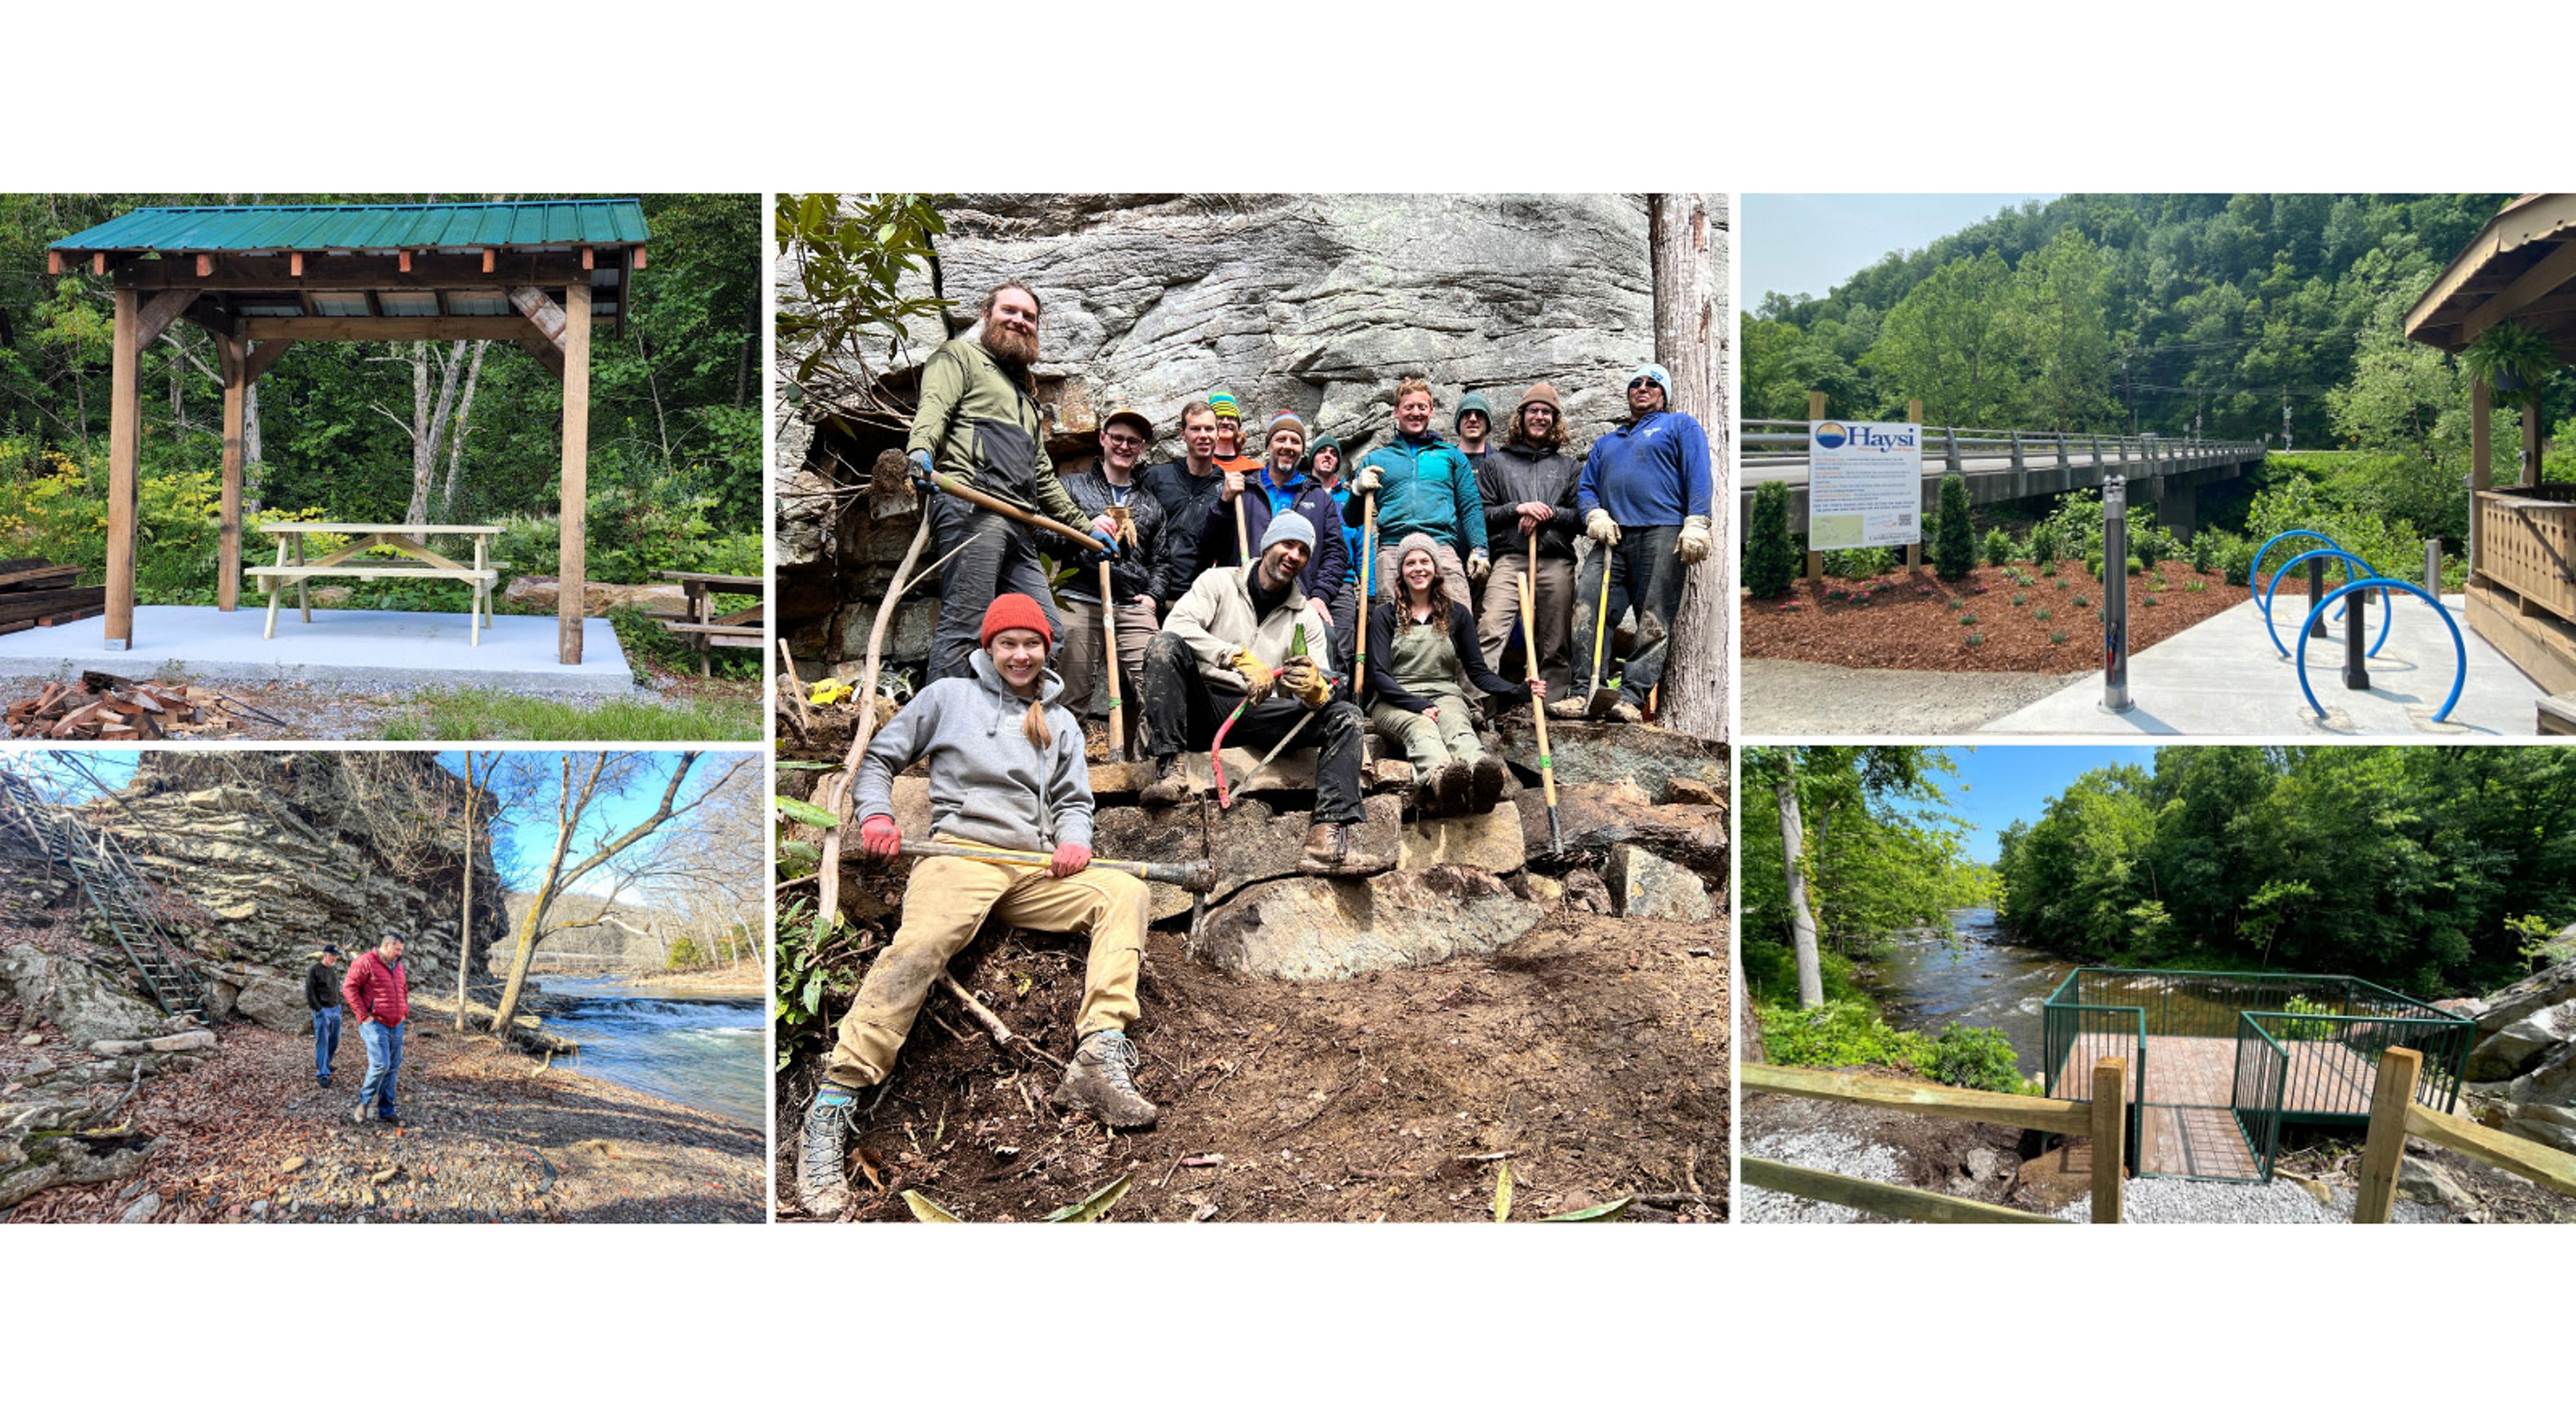 A collage of images featuring projects that enhance the cultural and environmental landscape of Southwest Virginia completed through the Cumberland Forest Community Fund.